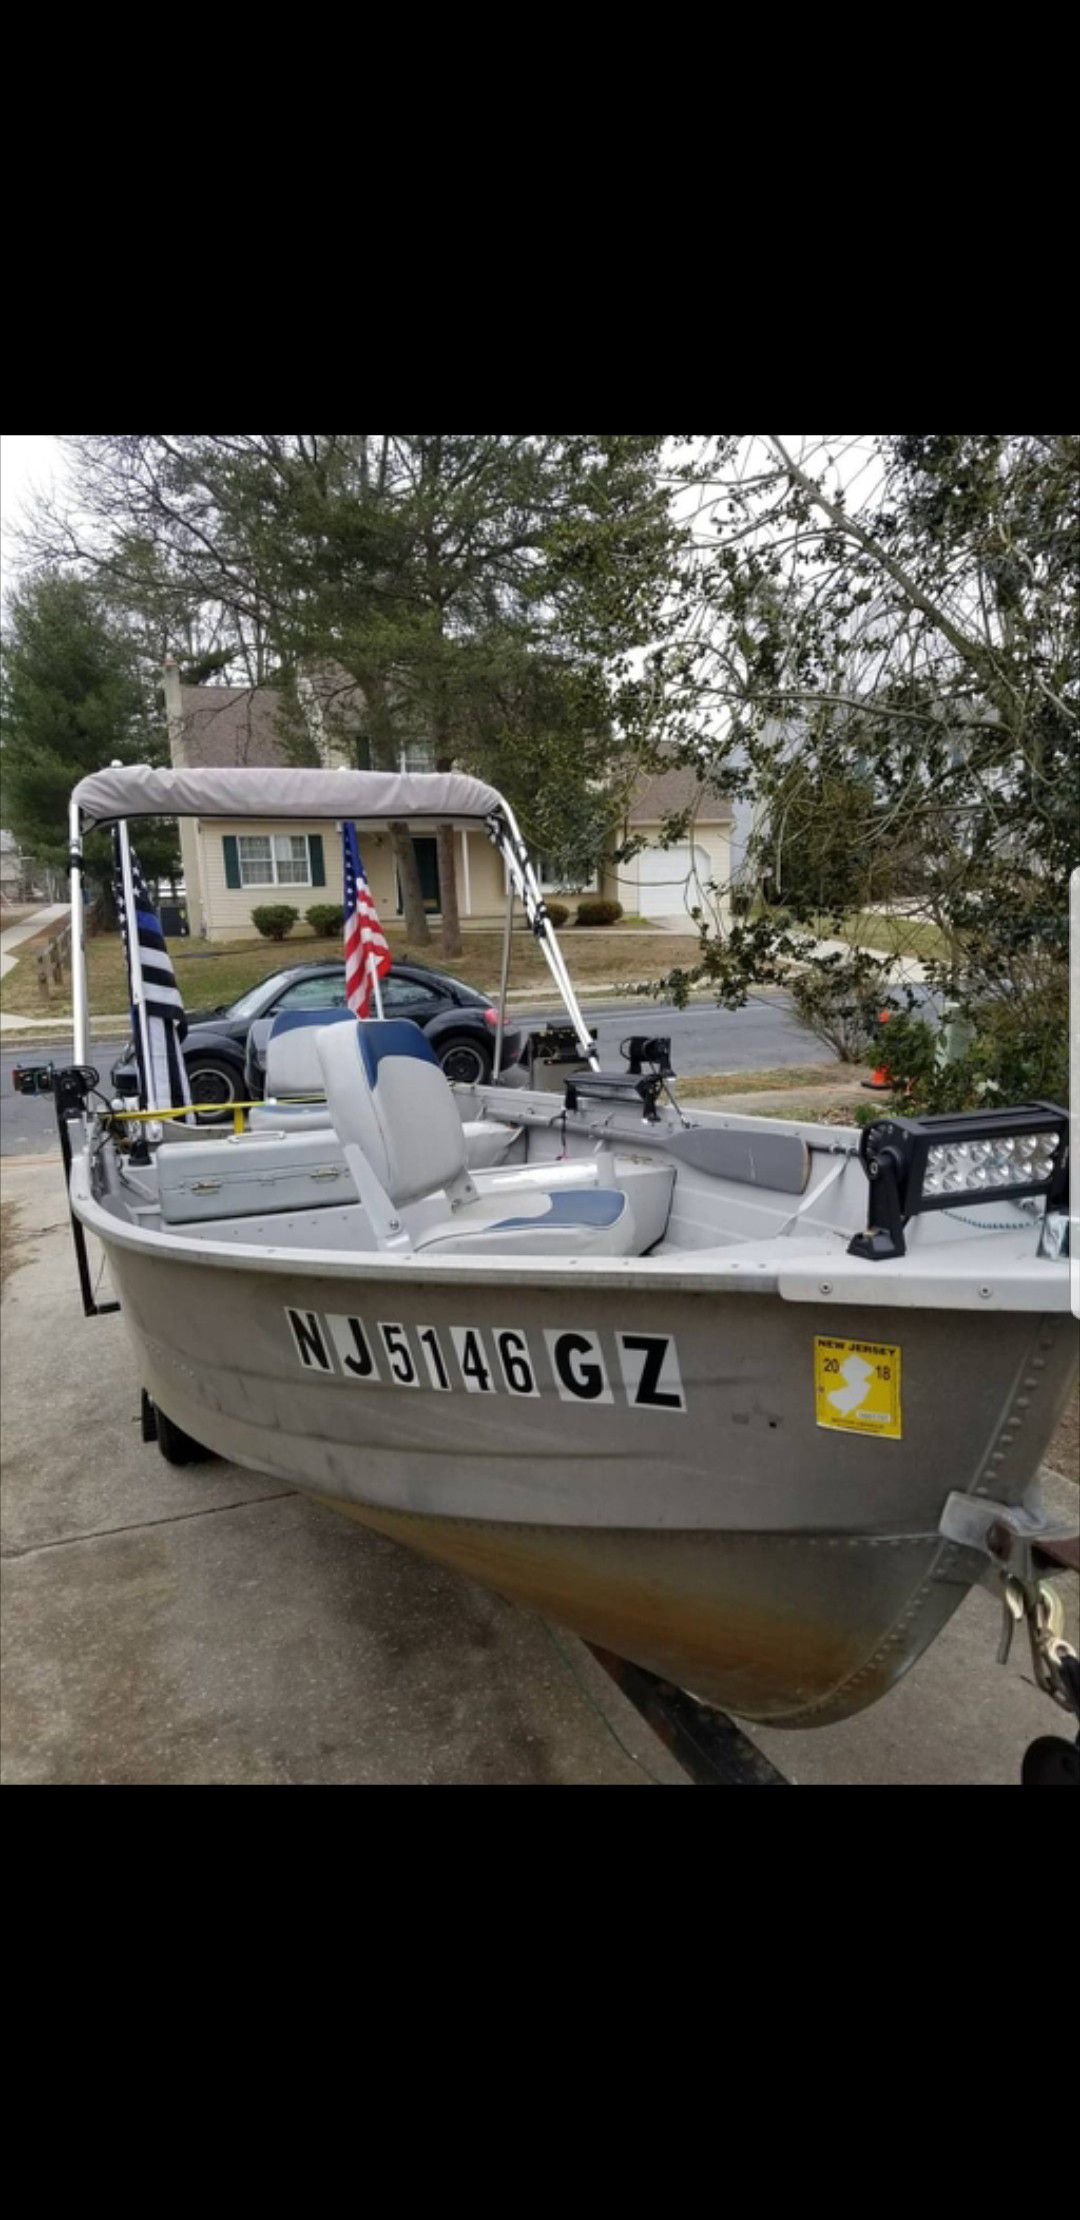 14' aluminum boat. Titles for both boat and trailer. Whole package everything you need. Deal of the summer. Getting new boat.